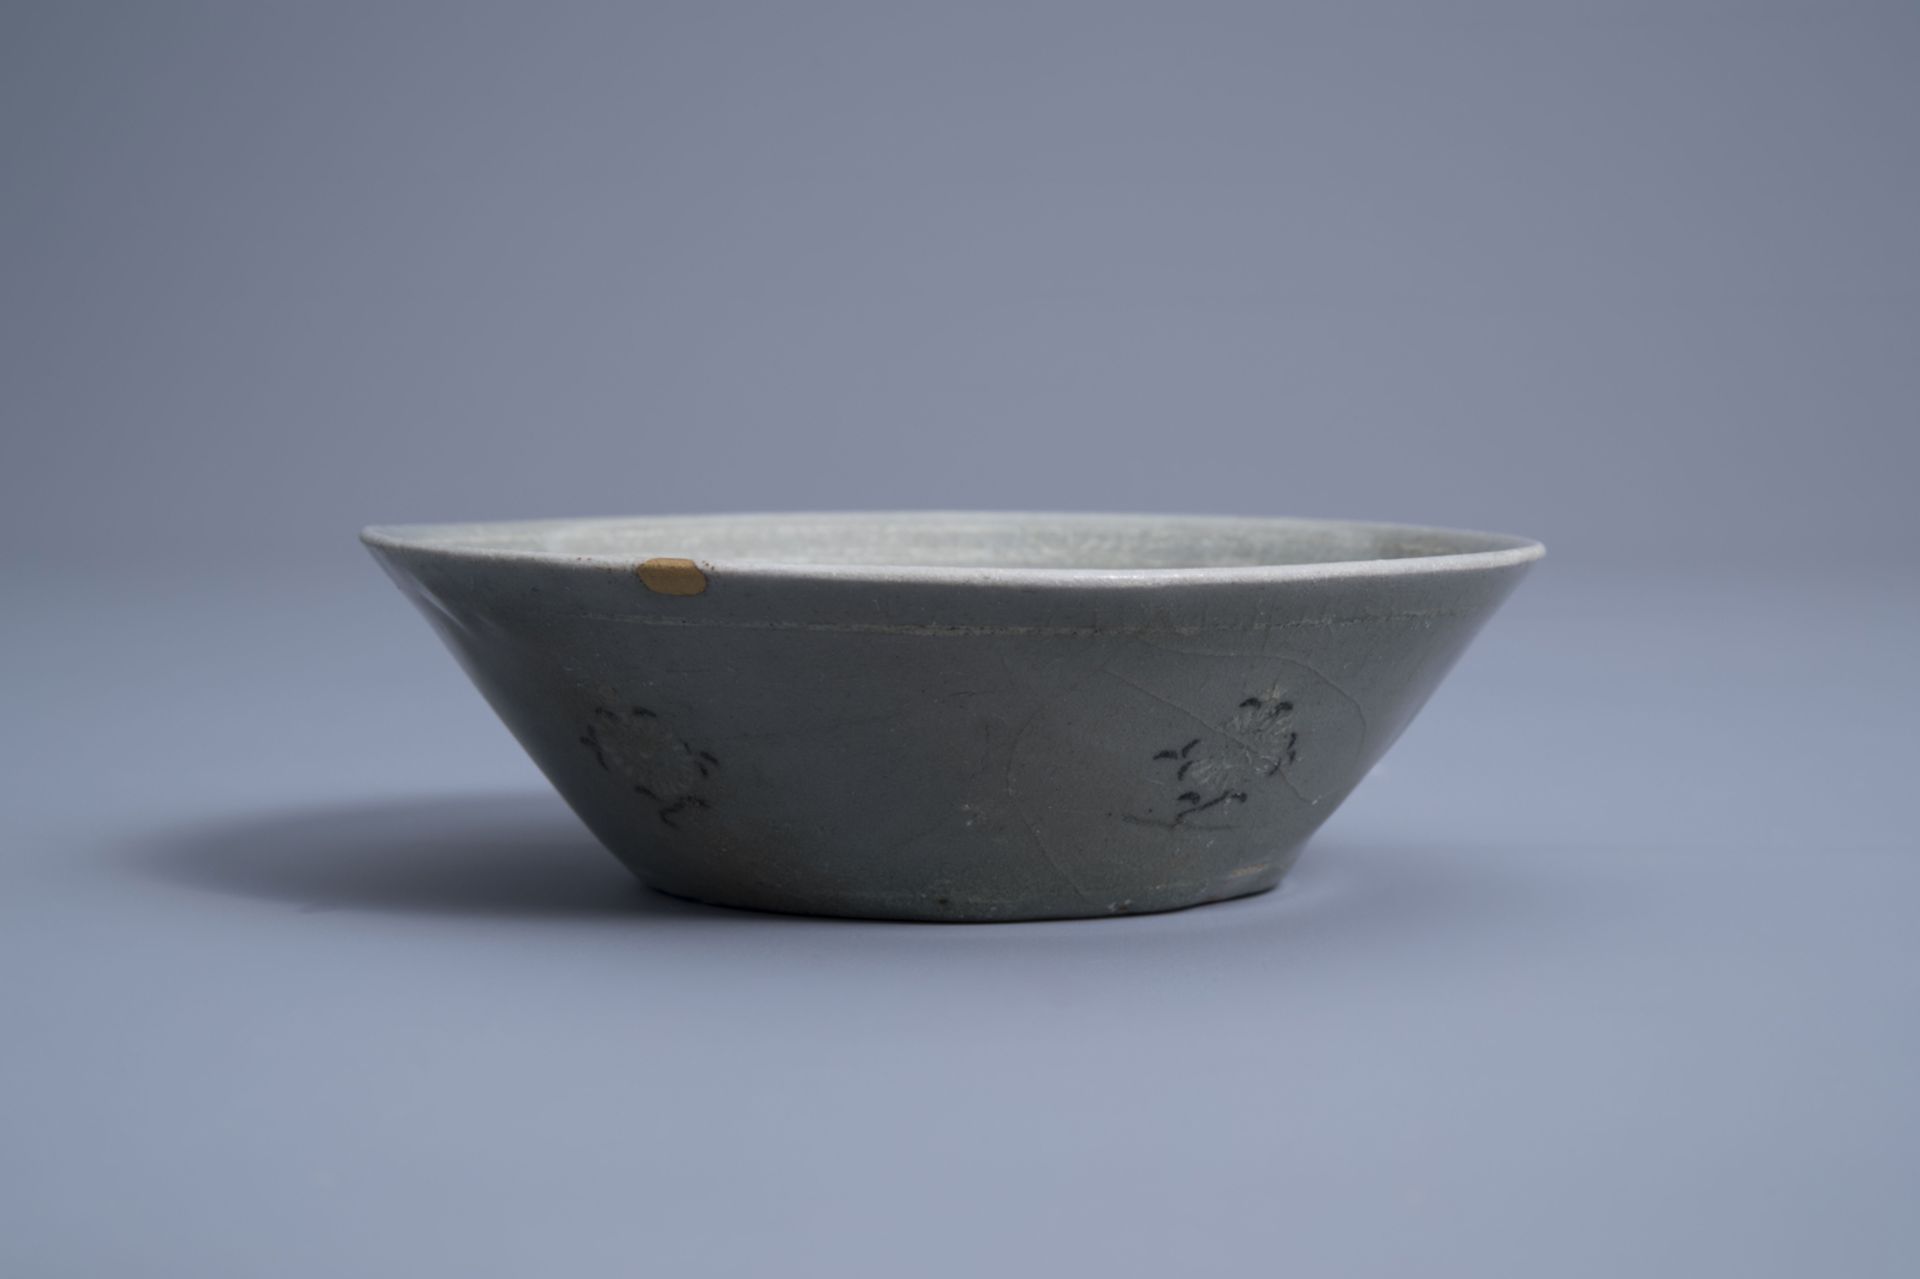 A Korean celadon bowl with ornamental design, probably Goryeo/Joseon, 14th/15th C. - Image 6 of 6